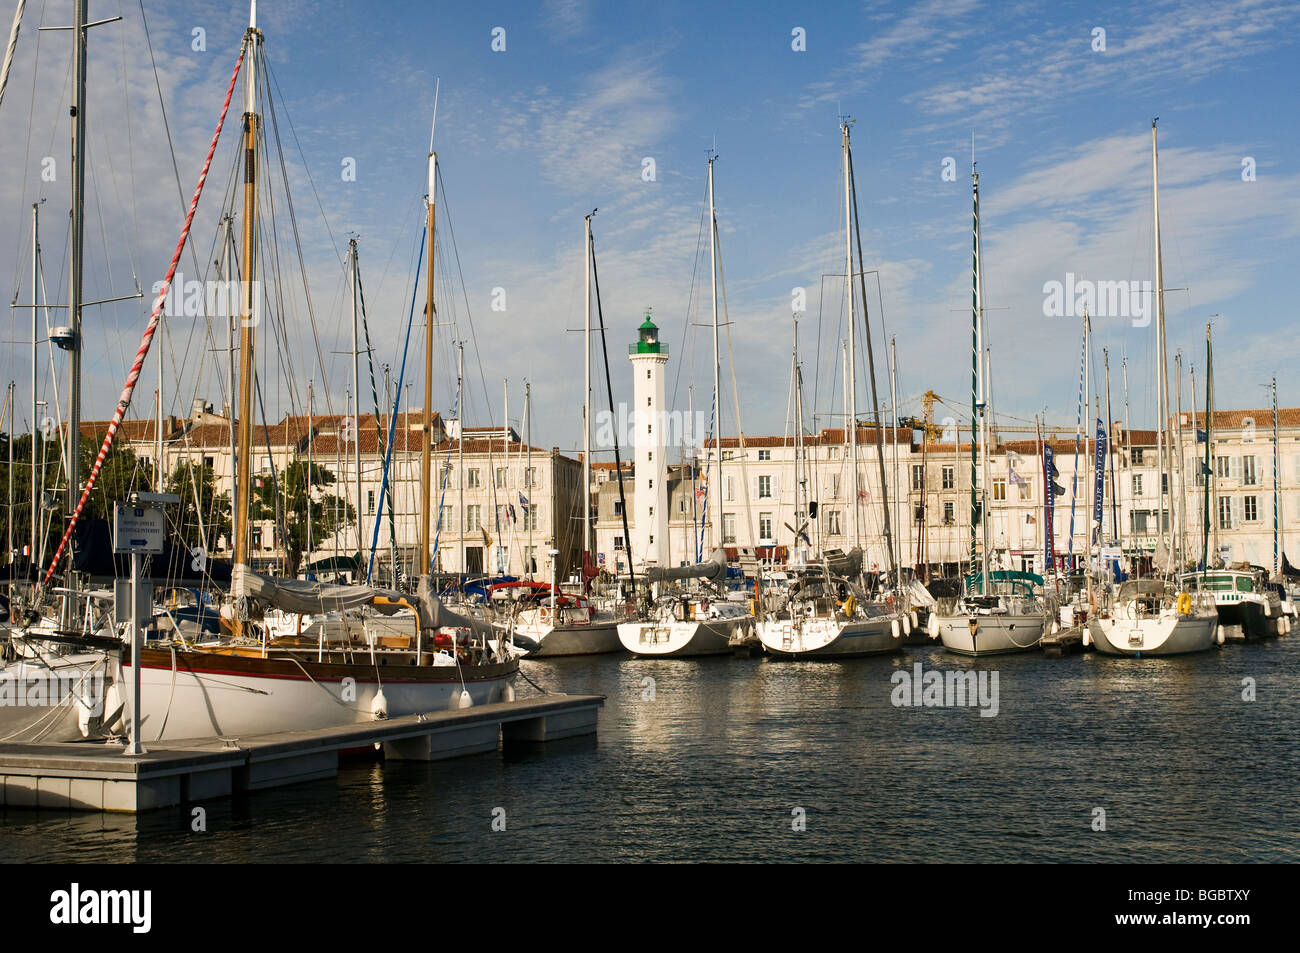 The Old Port, the oldest port of La Rochelle and the historic heart of this city of Charente-Maritime, New Aquitaine, France. Stock Photo